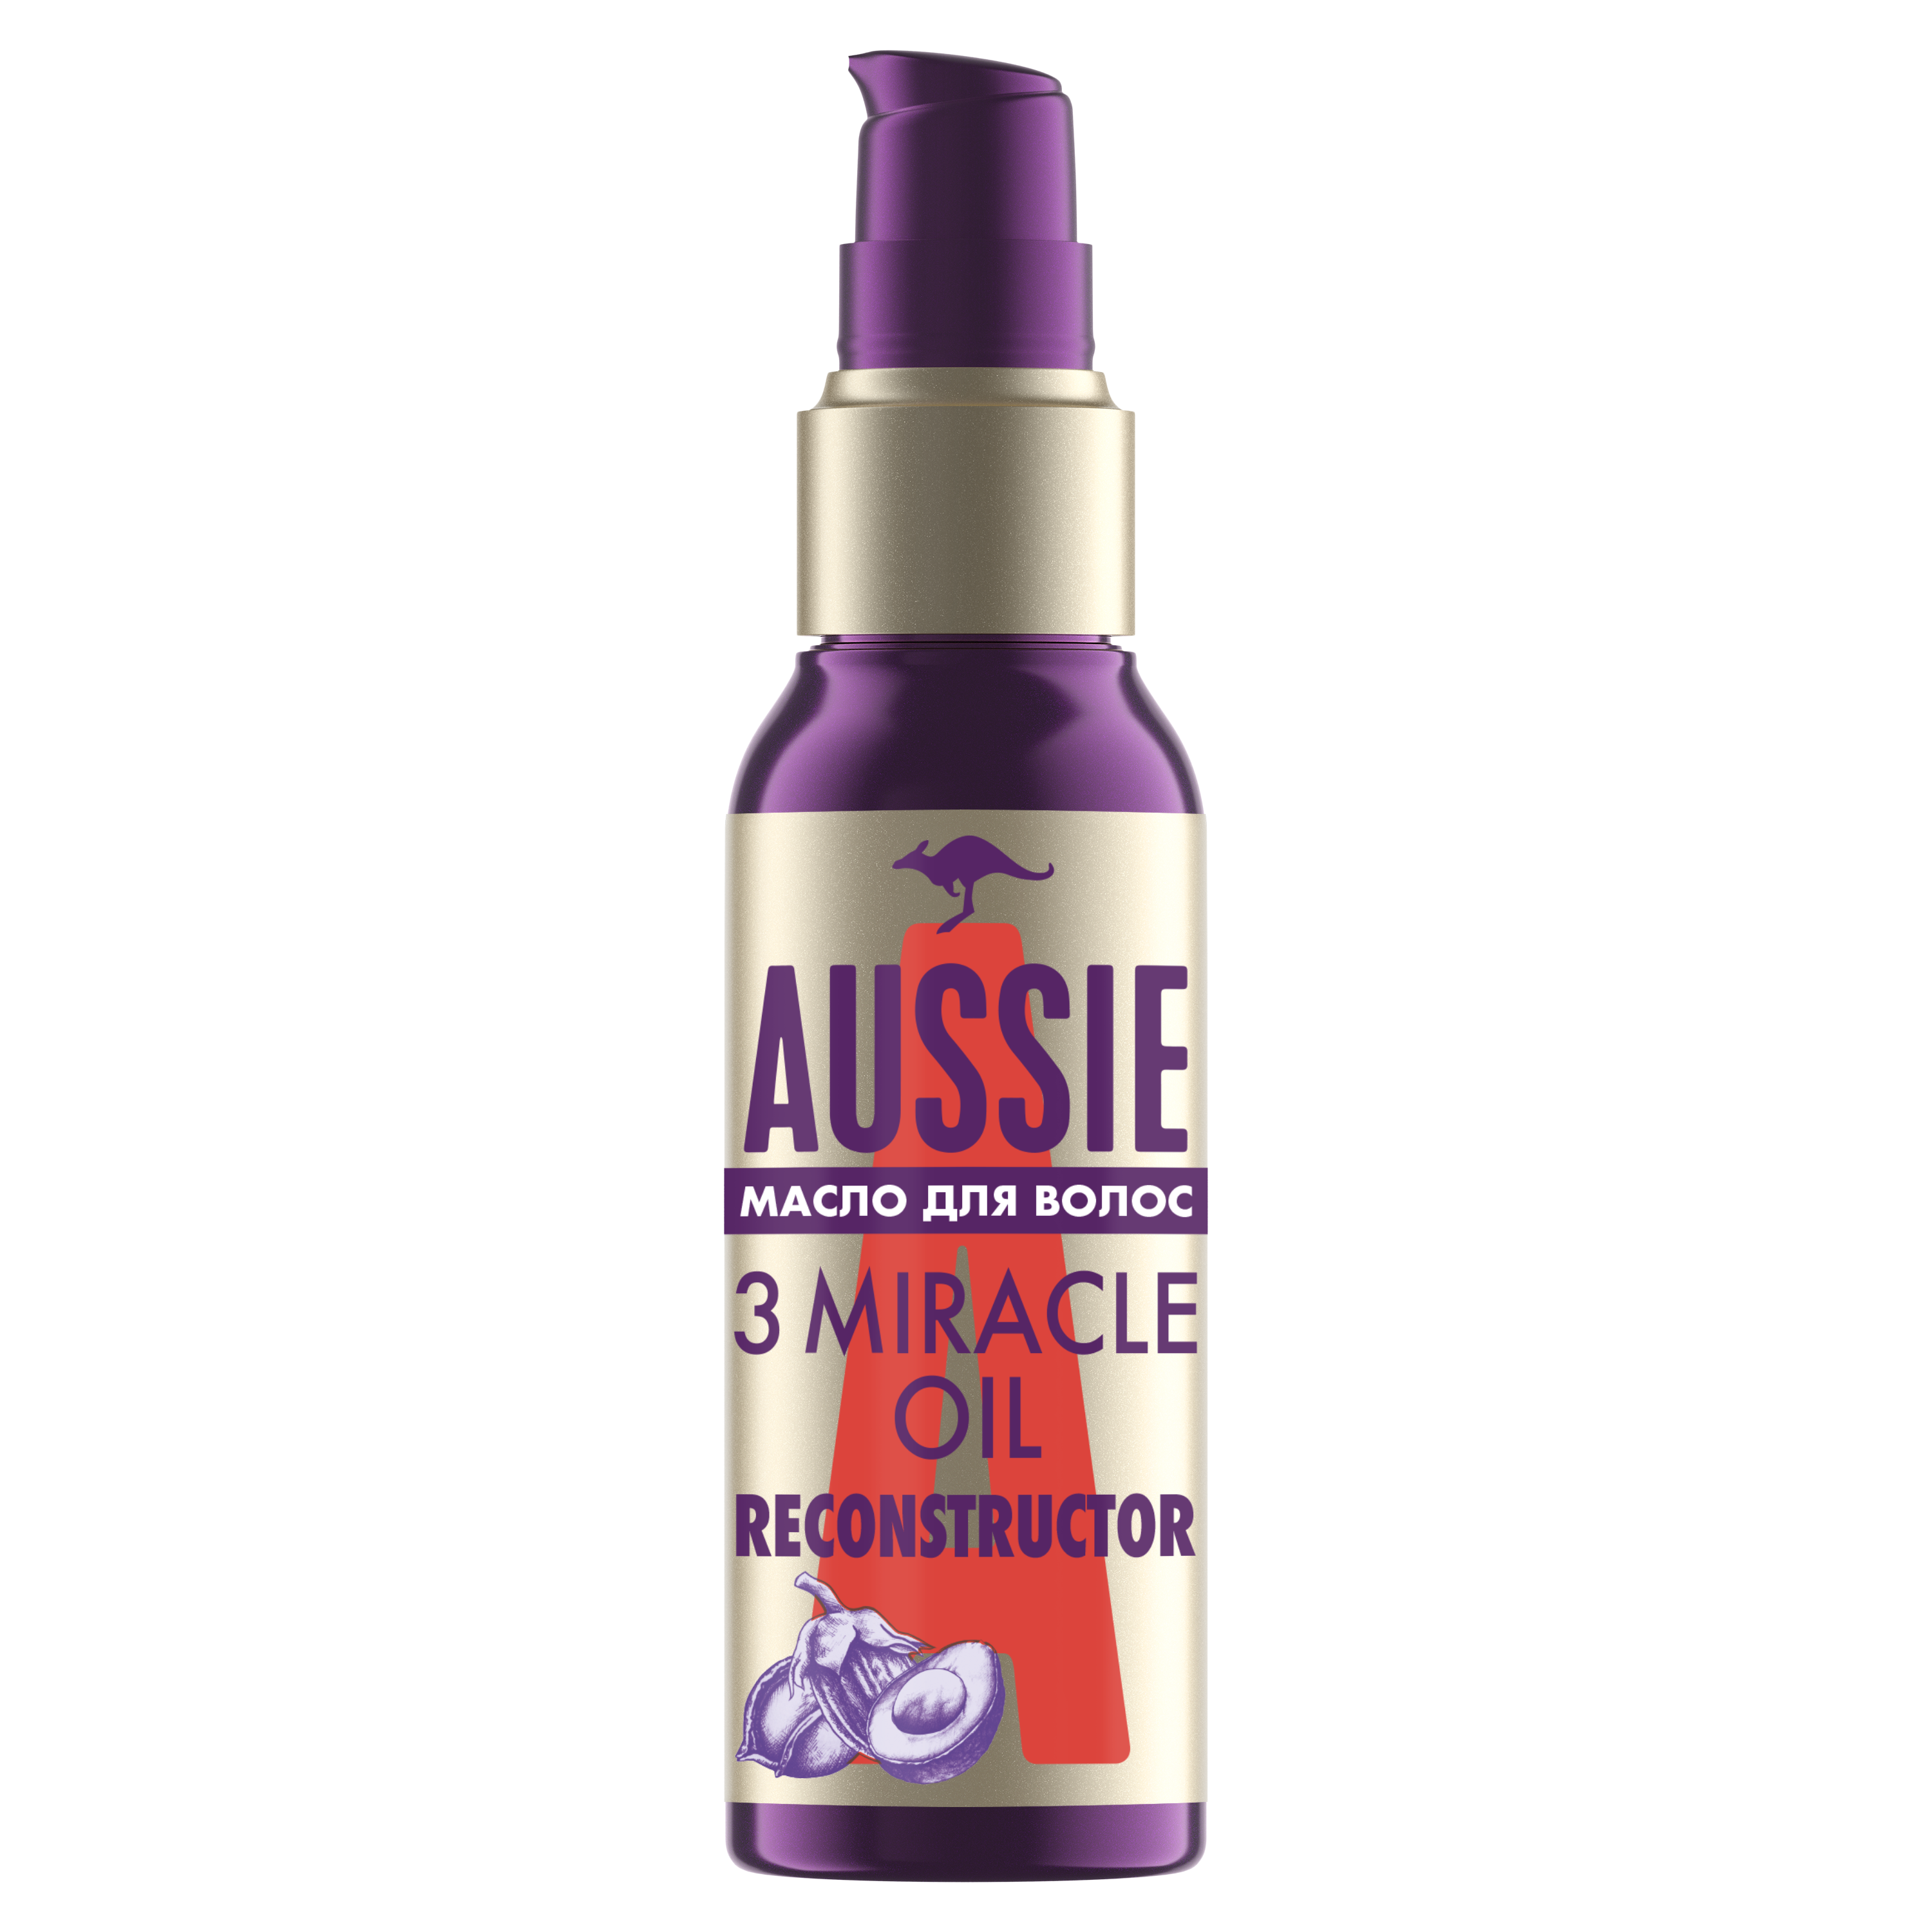 Масло для волос Aussie 3 Miracle Oil Reconstructor, 100 мл - фото 1